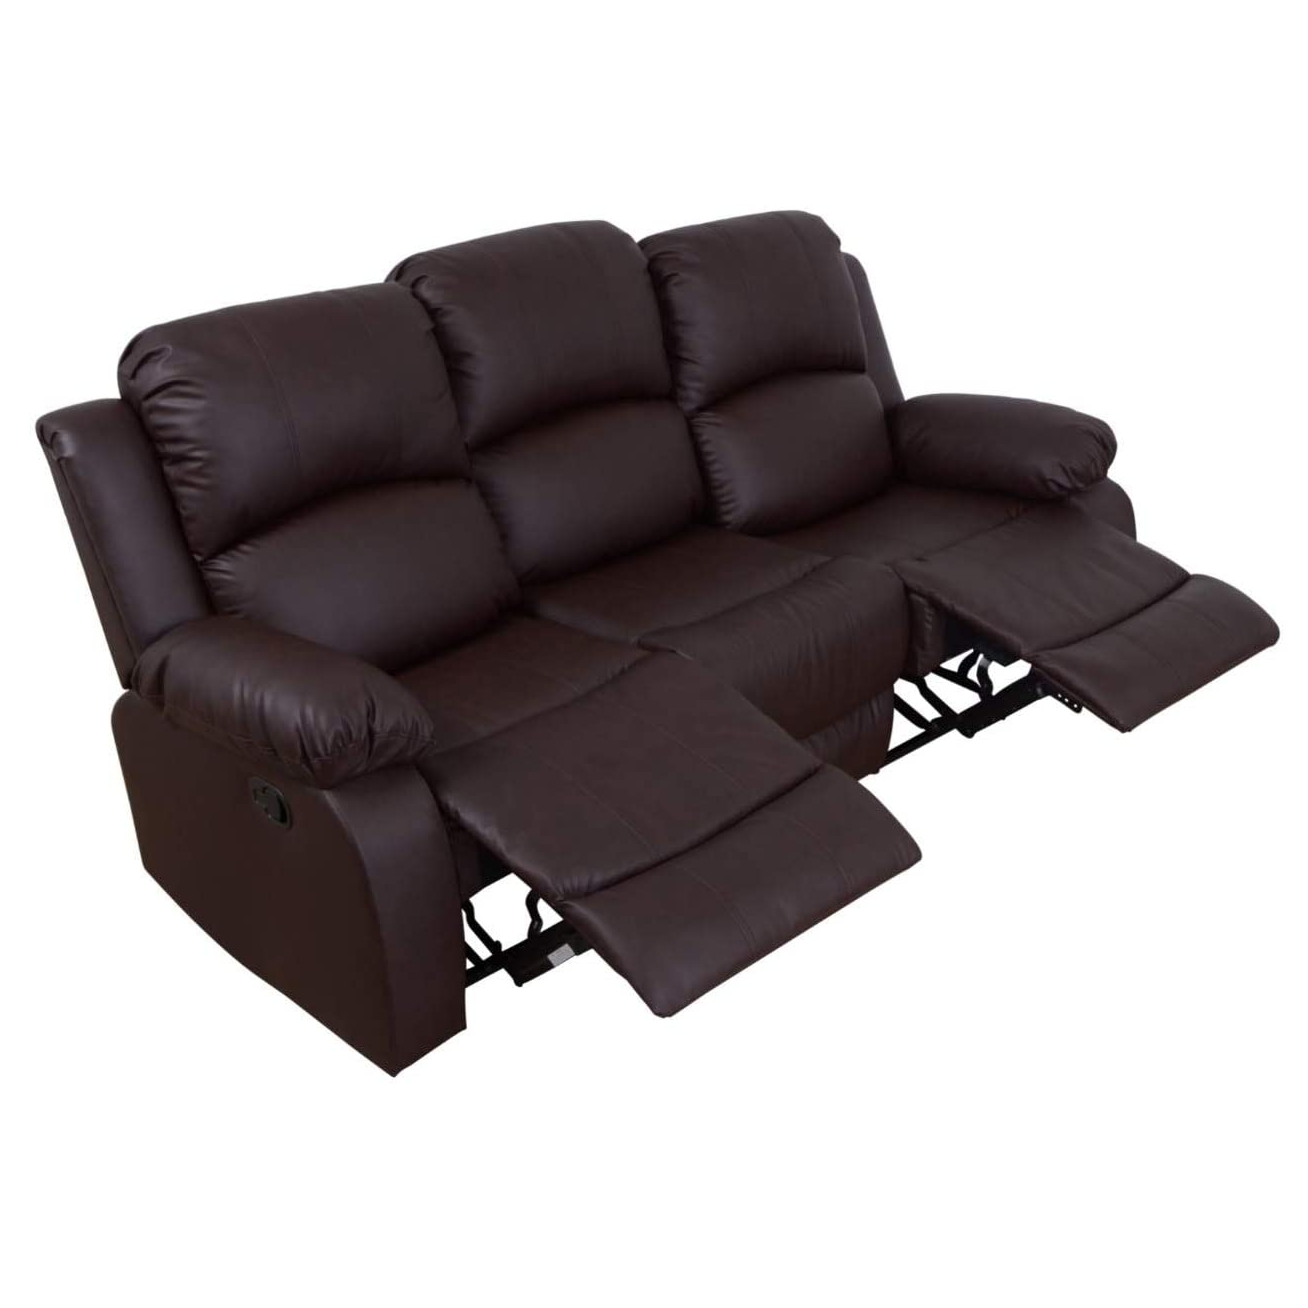 3 Seater Recliner Sofa Featured Image